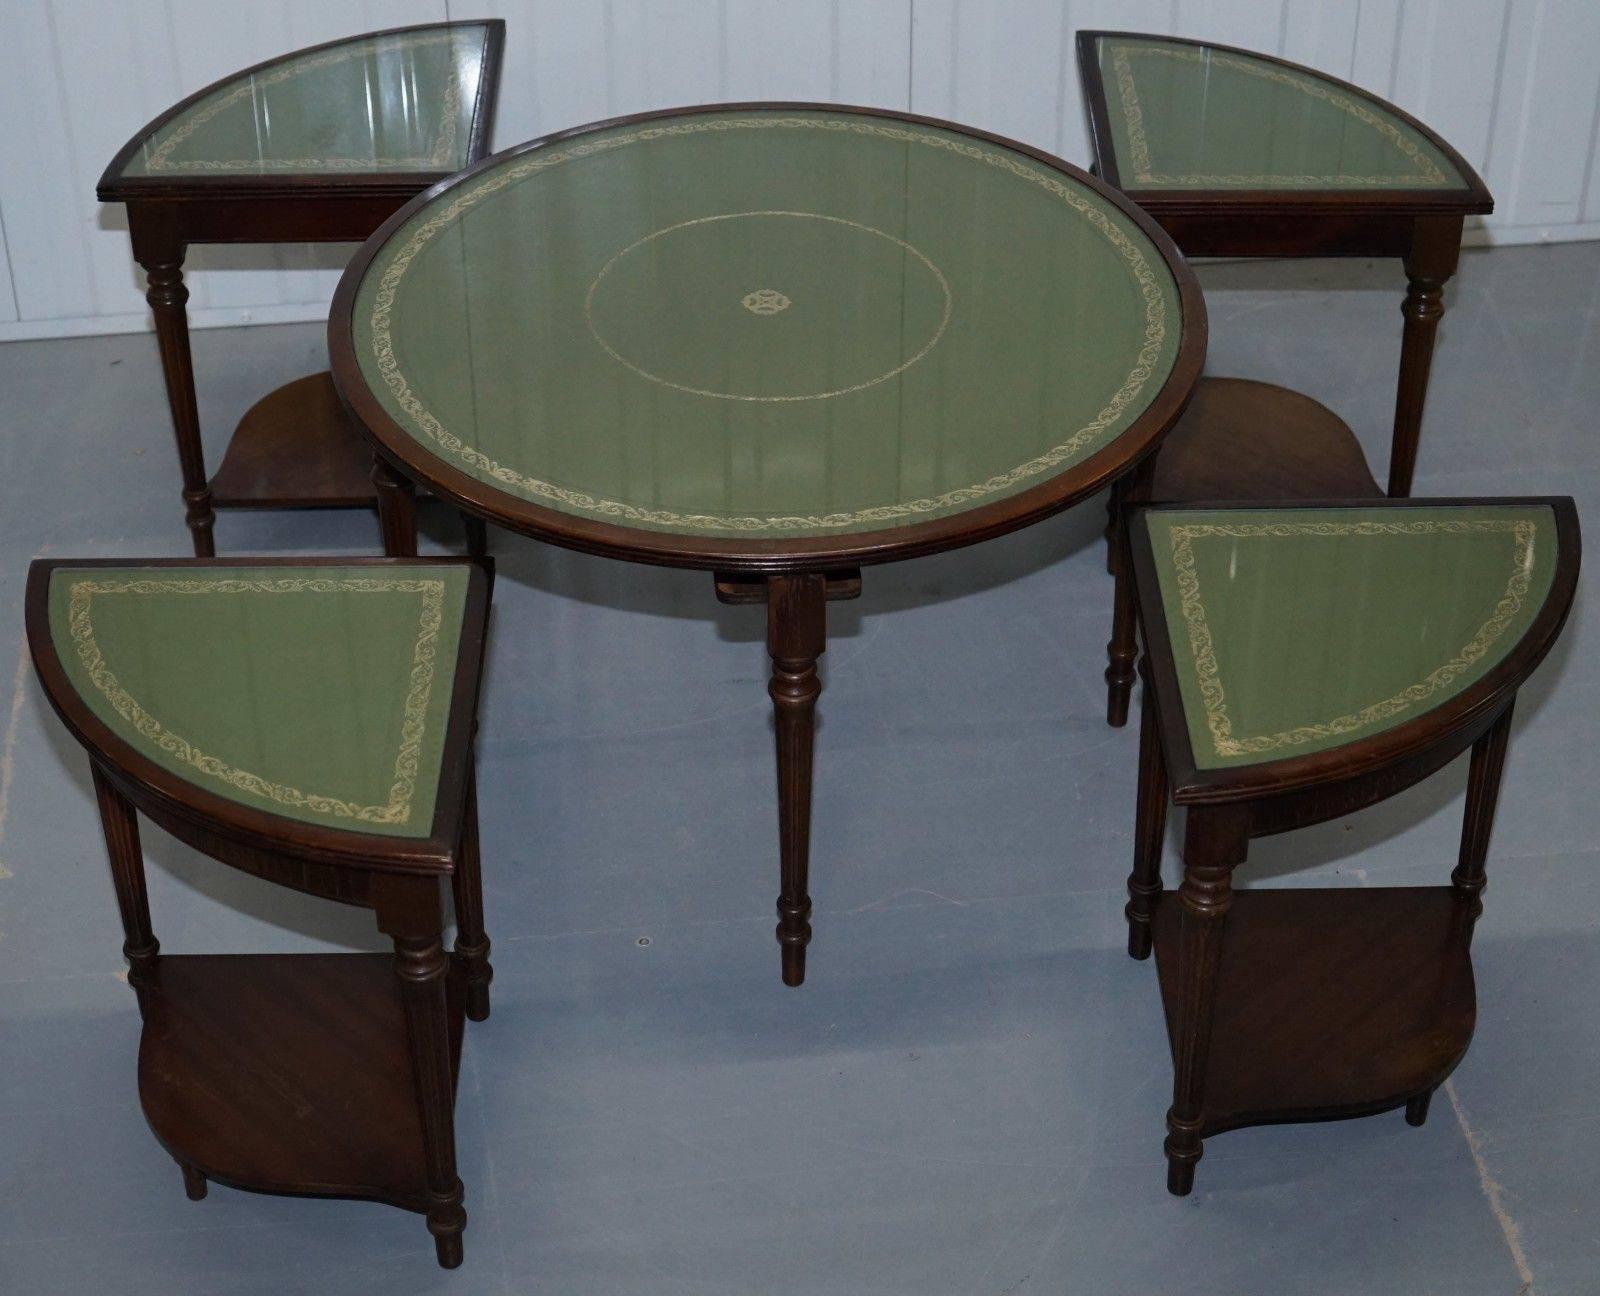 Lovely Regency Style Drum Coffee Table with Nested Tables under Green Leather 3